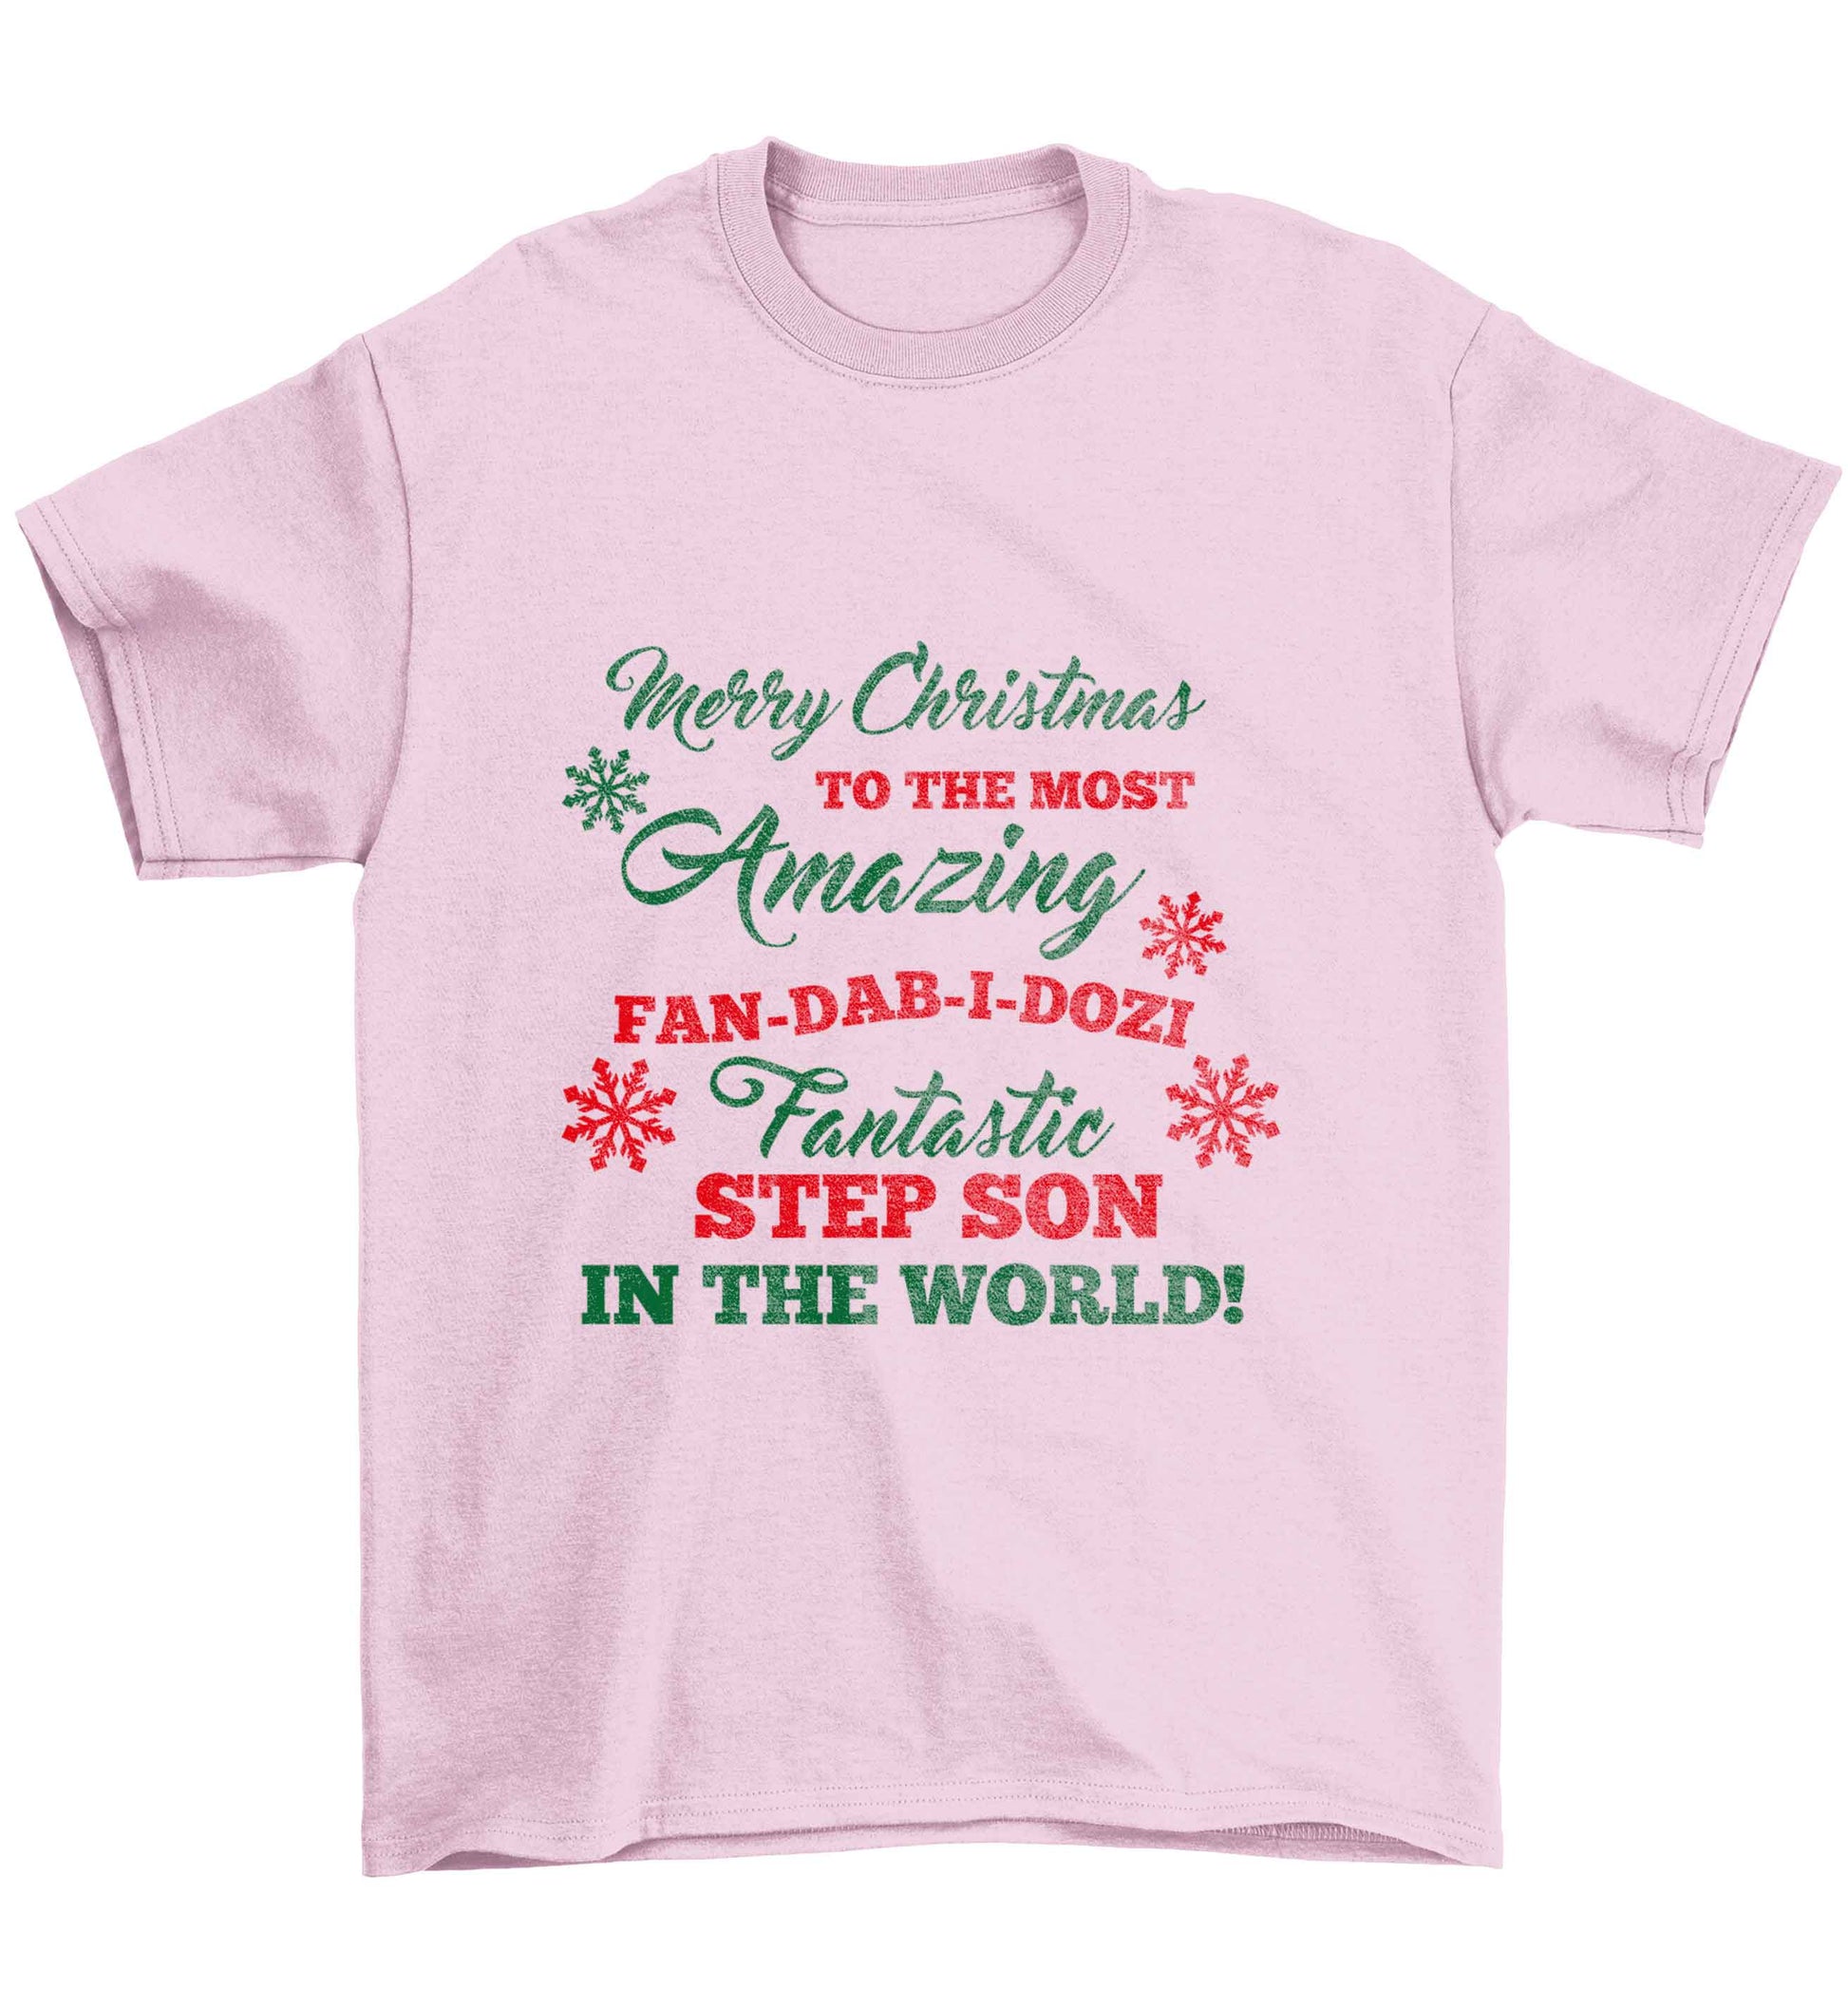 Merry Christmas to the most amazing fan-dab-i-dozi fantasic Step Son in the world Children's light pink Tshirt 12-13 Years